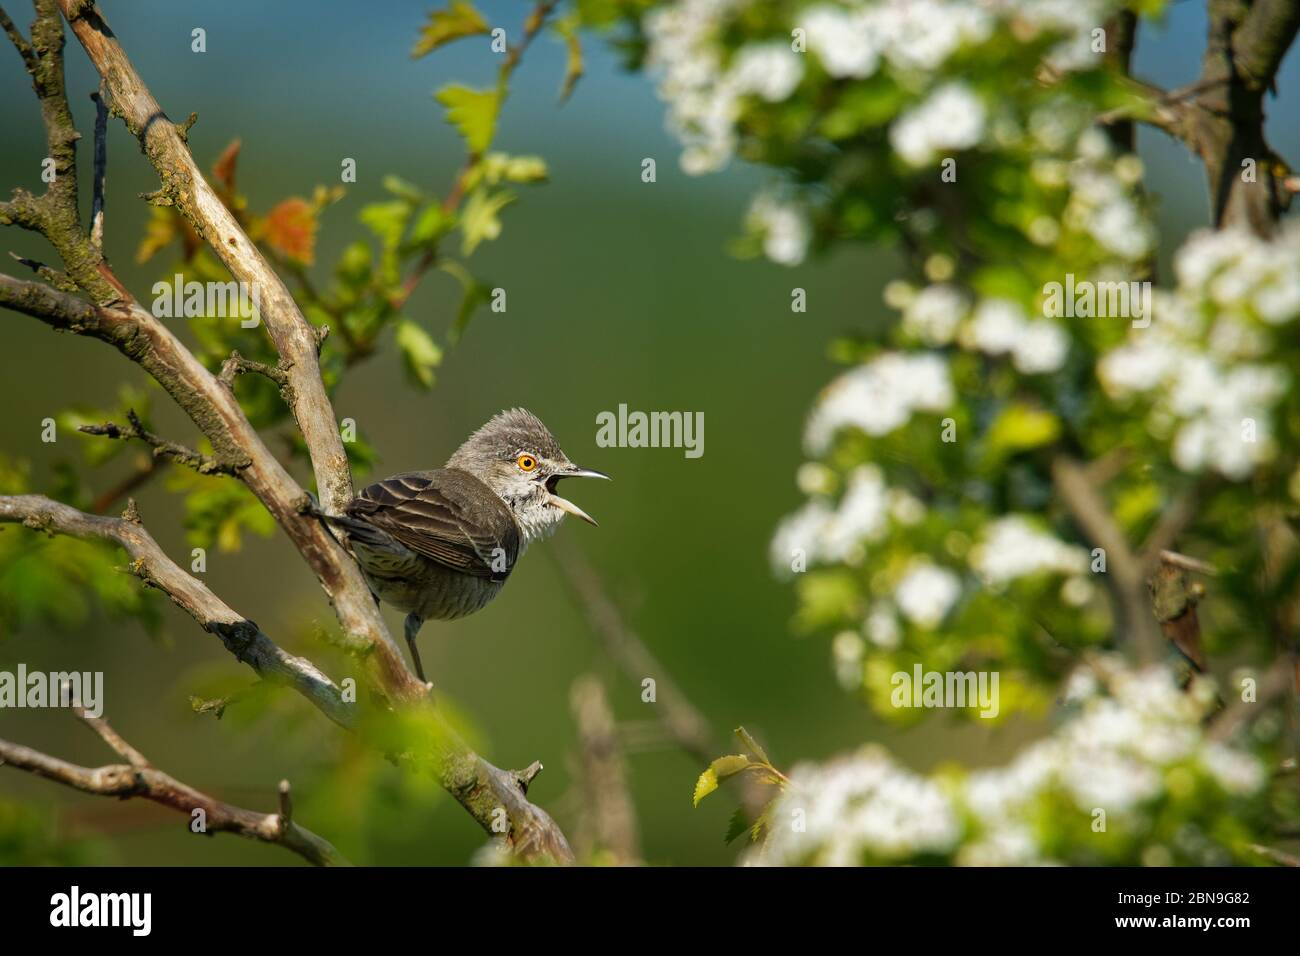 Barred Warbler - Sylvia nisoria singing birds, typical warbler, breeds in central and eastern Europe and western and central Asia, passerine bird stro Stock Photo